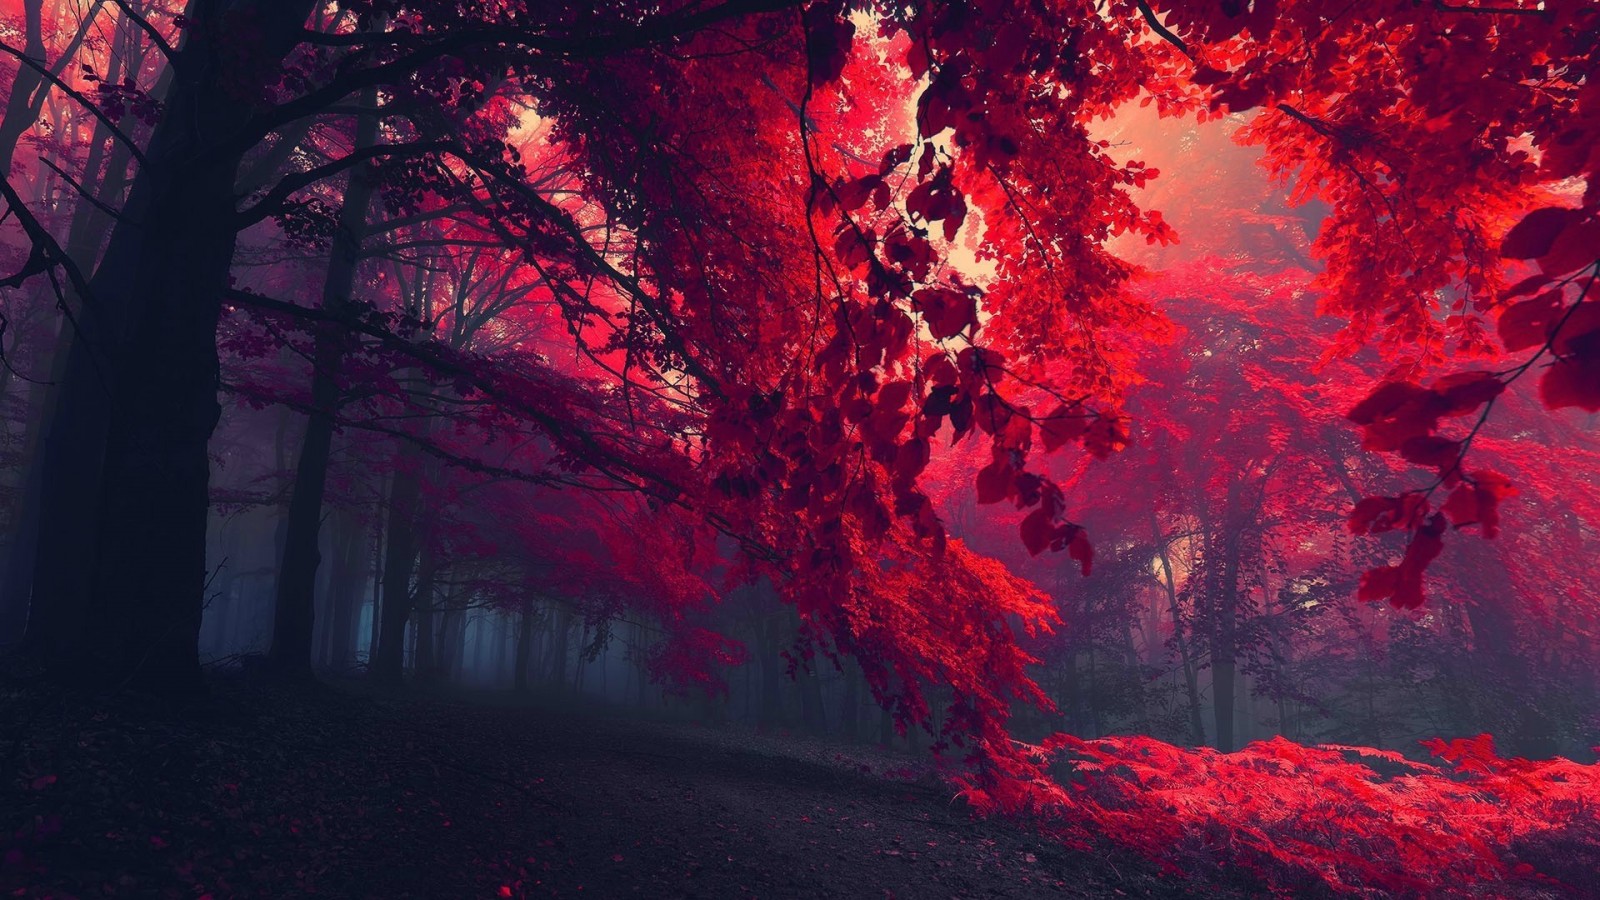 sunlight, trees, forest, fall, leaves, dark, nature, red, autumn, season, darkness, screenshot, computer wallpaper, geological phenomenon High quality walls